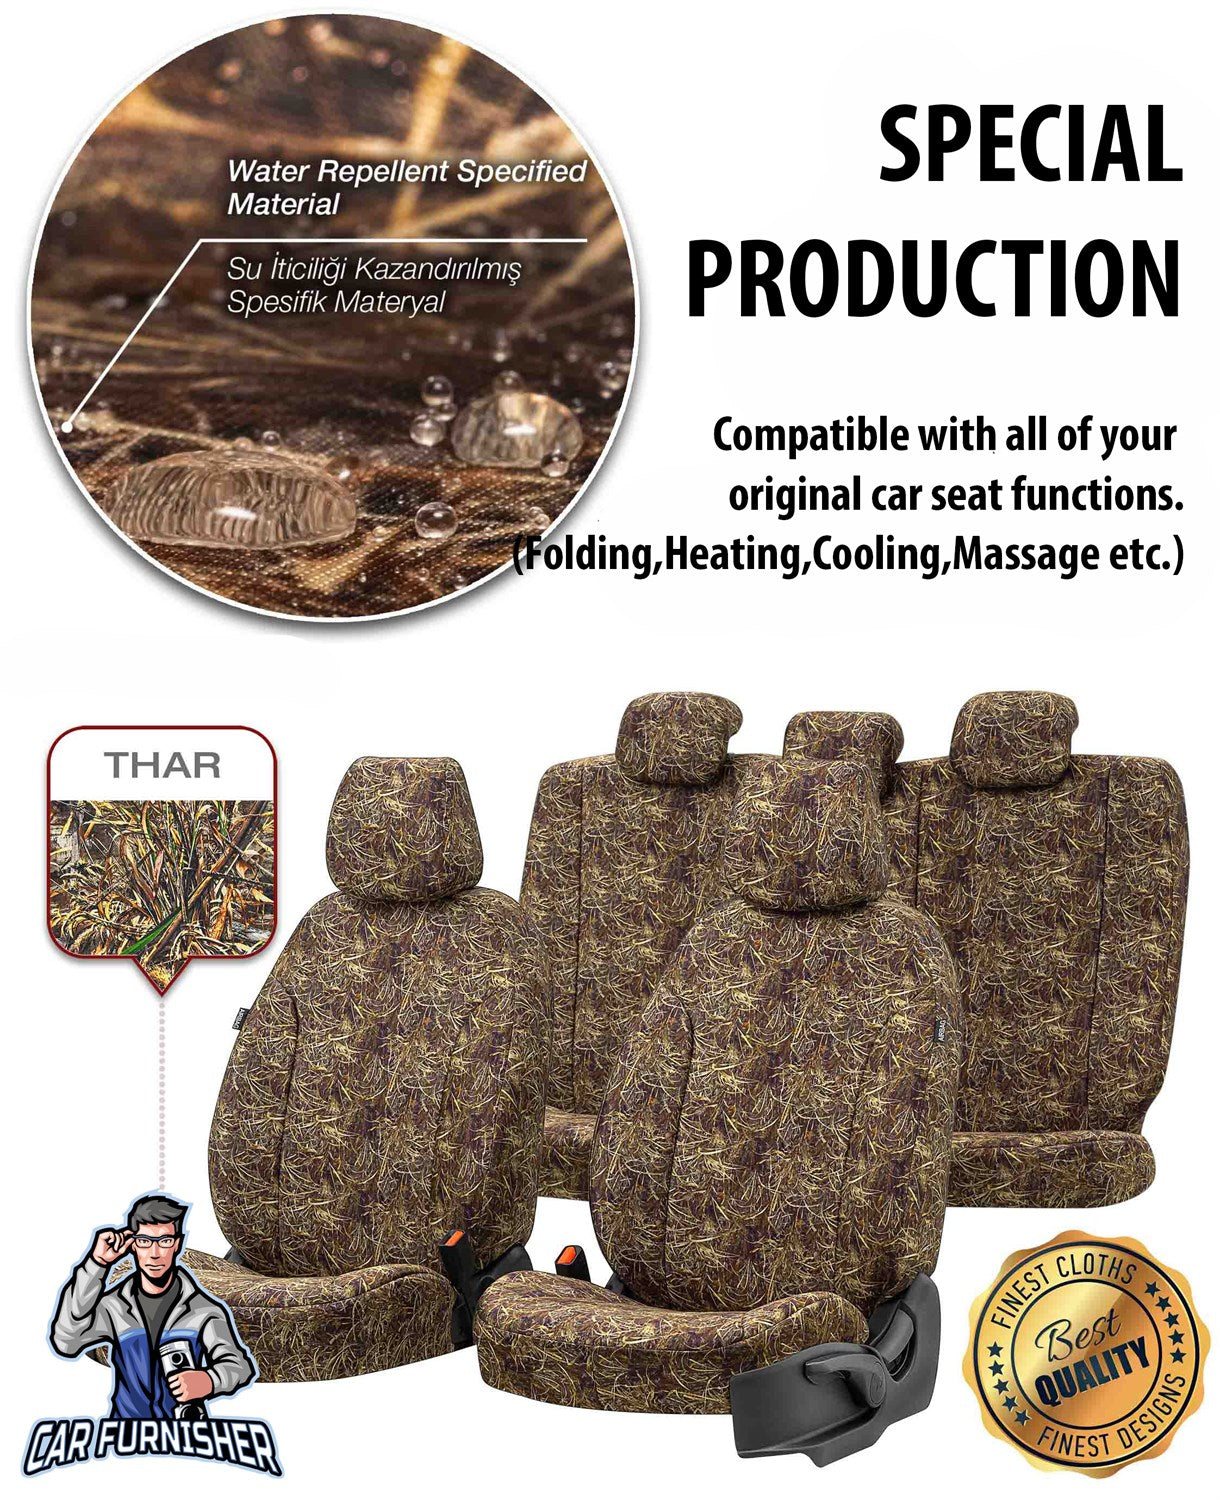 Mercedes X-Class Seat Covers Camouflage Waterproof Design Montblanc Camo Waterproof Fabric